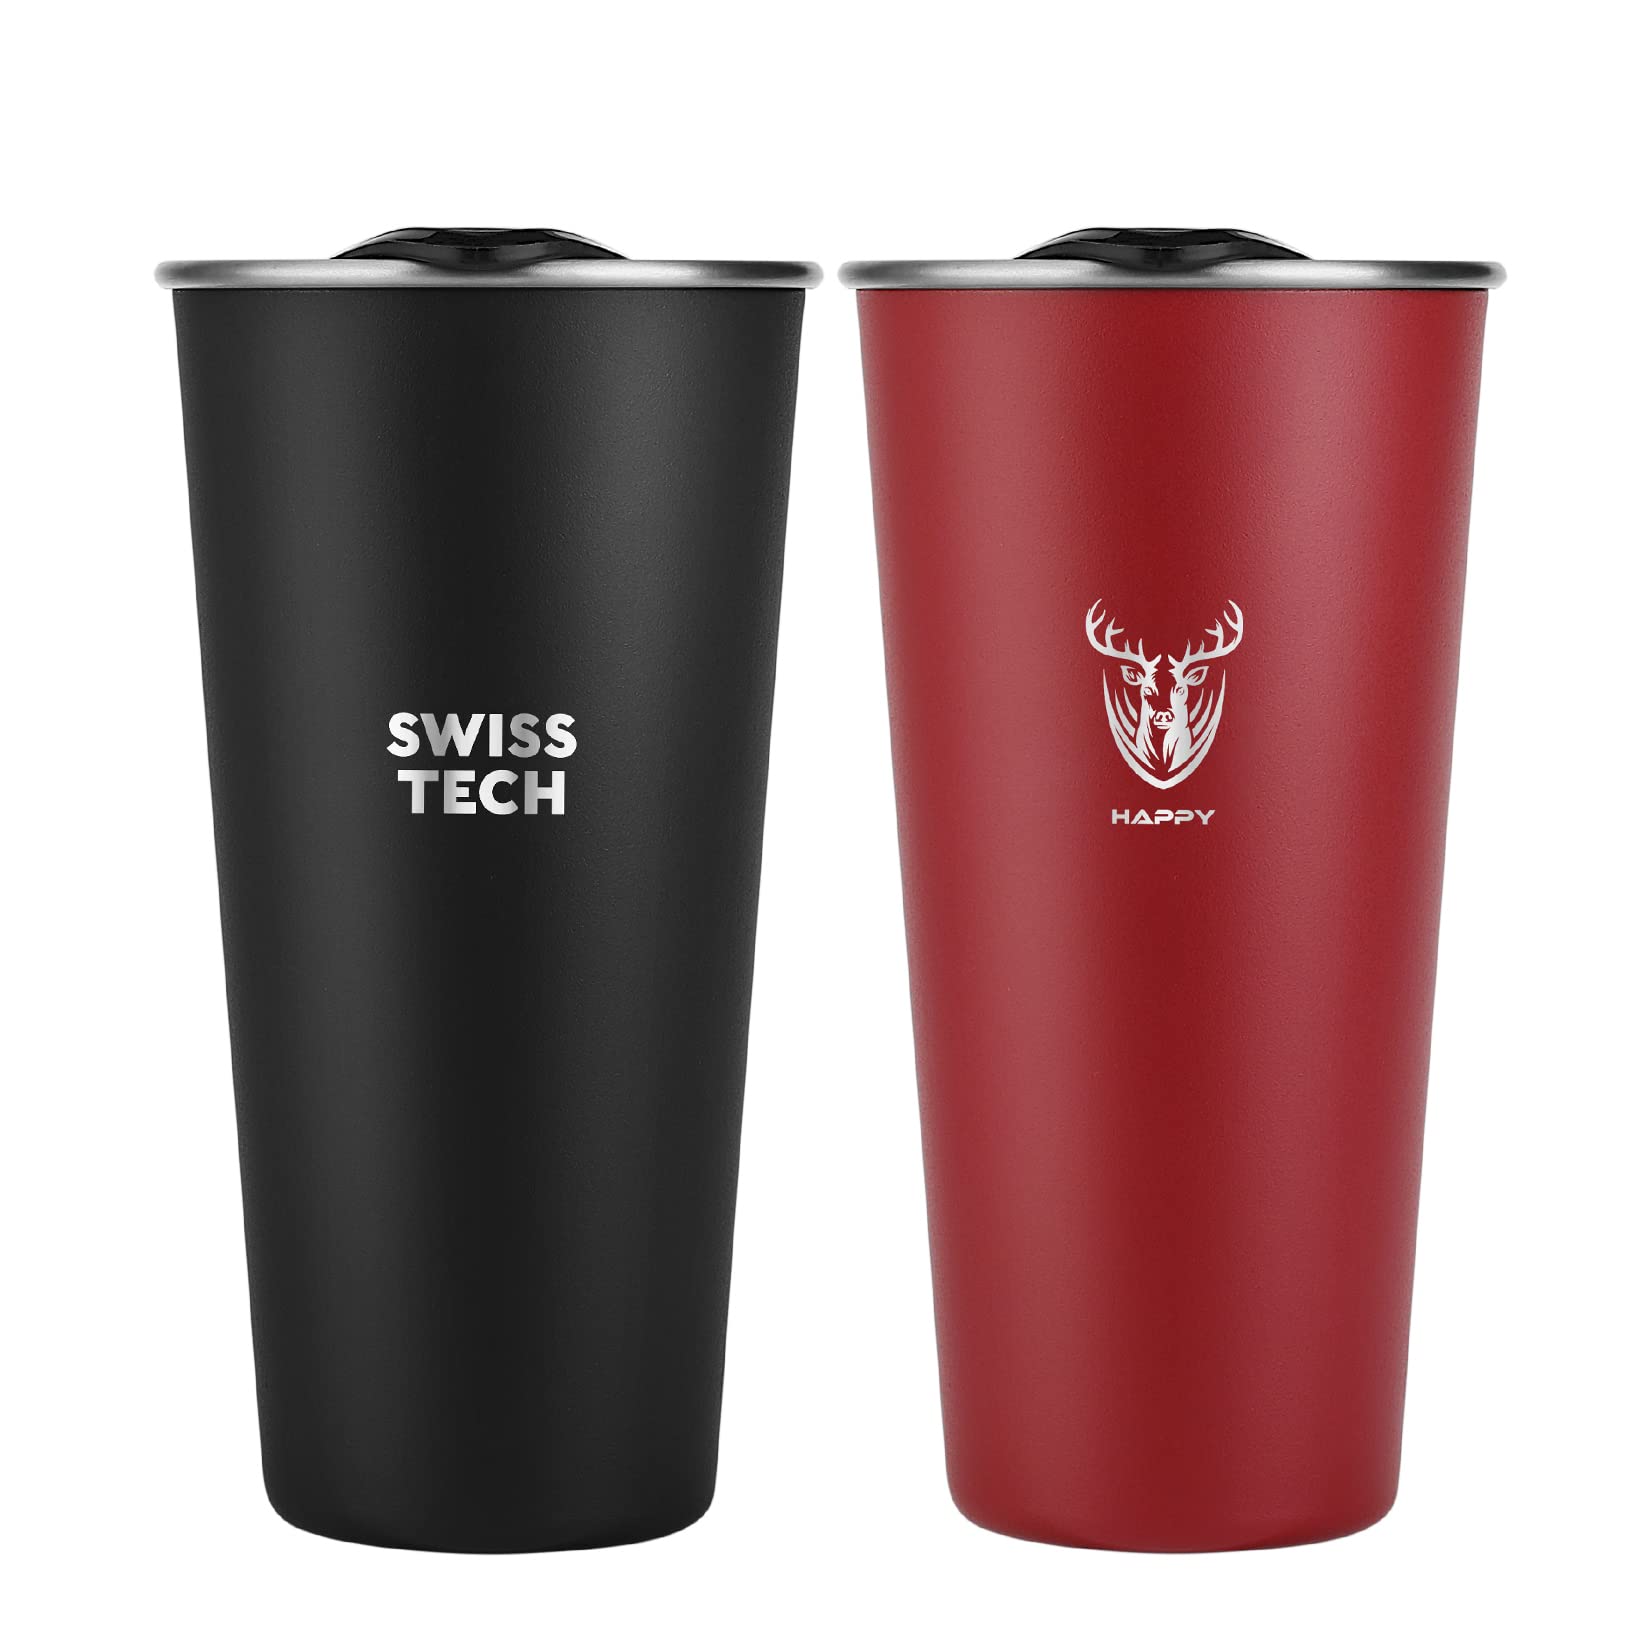 Swiss+Tech 16oz Double Wall Stainless Steel Cups with lids, 2 Pack